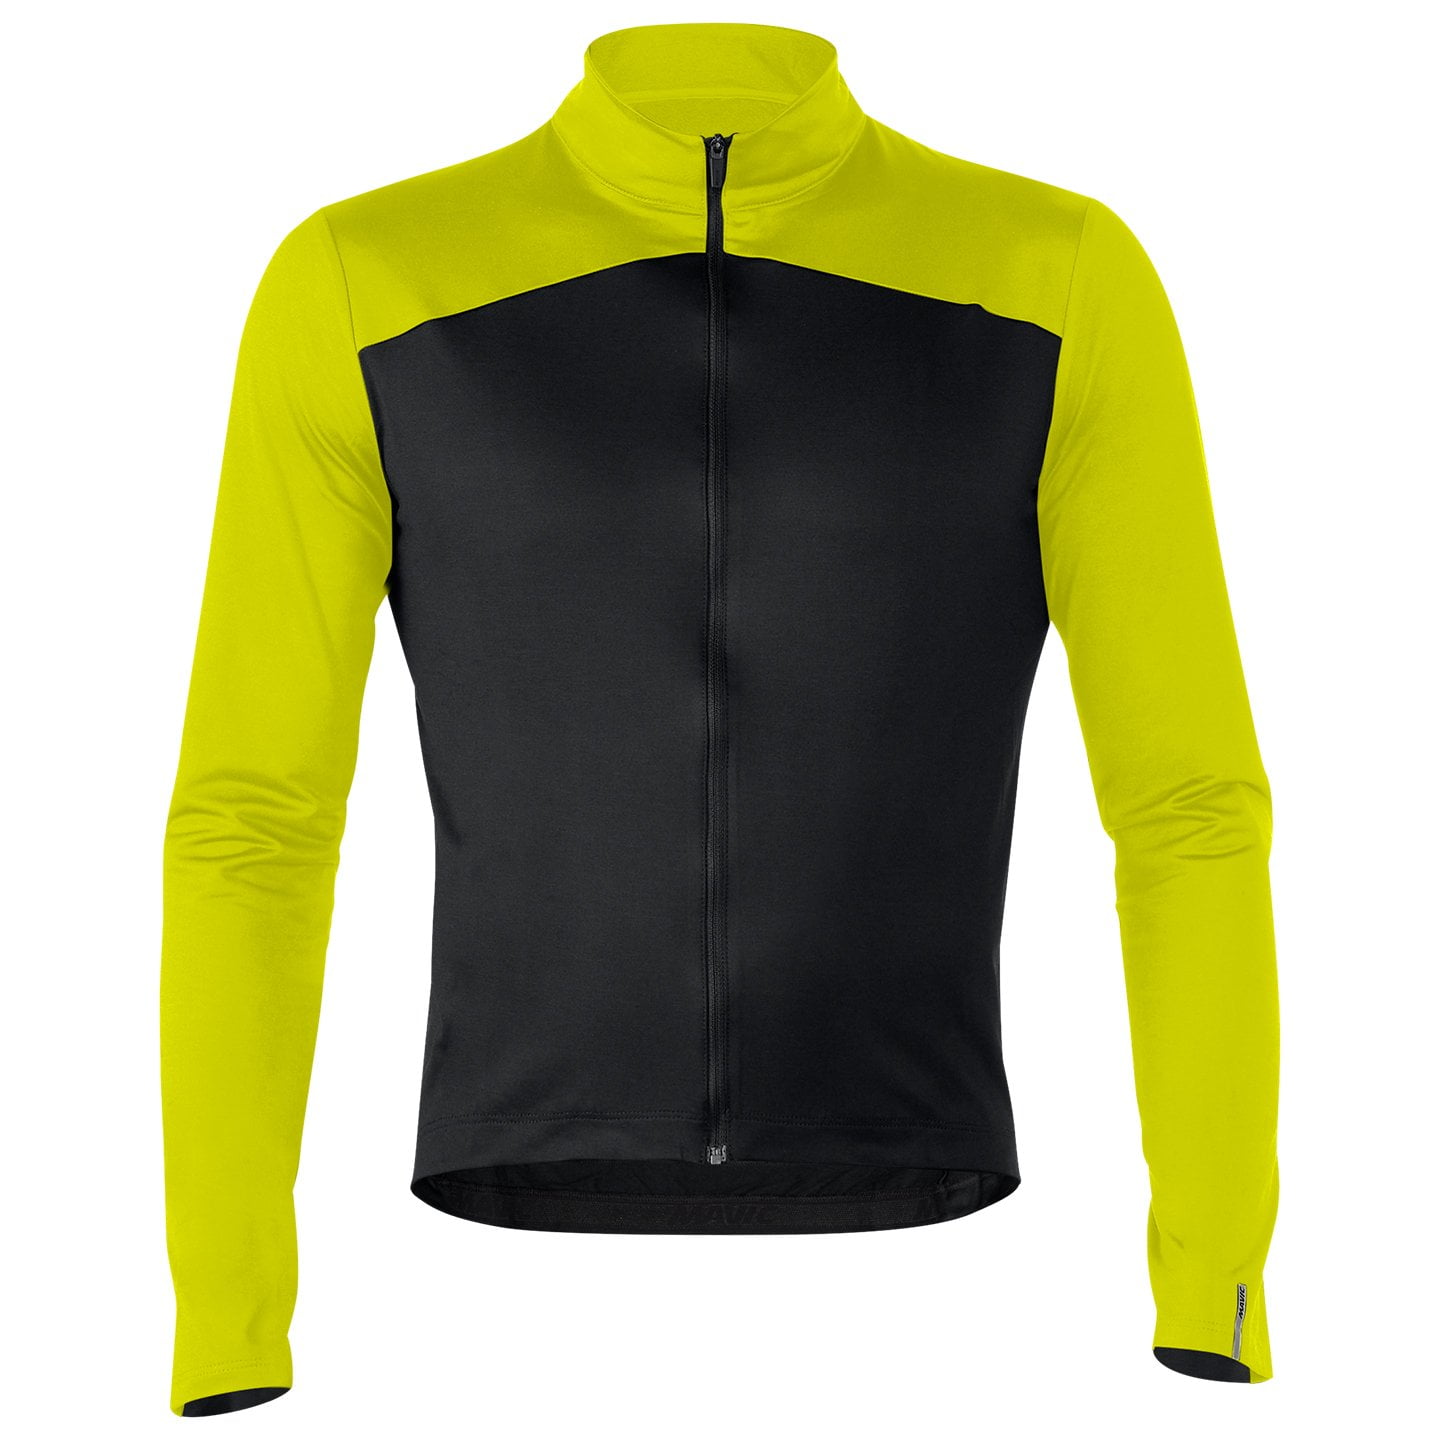 MAVIC Cosmic Long Sleeve Jersey, for men, size 2XL, Cycling jersey, Cycle clothing